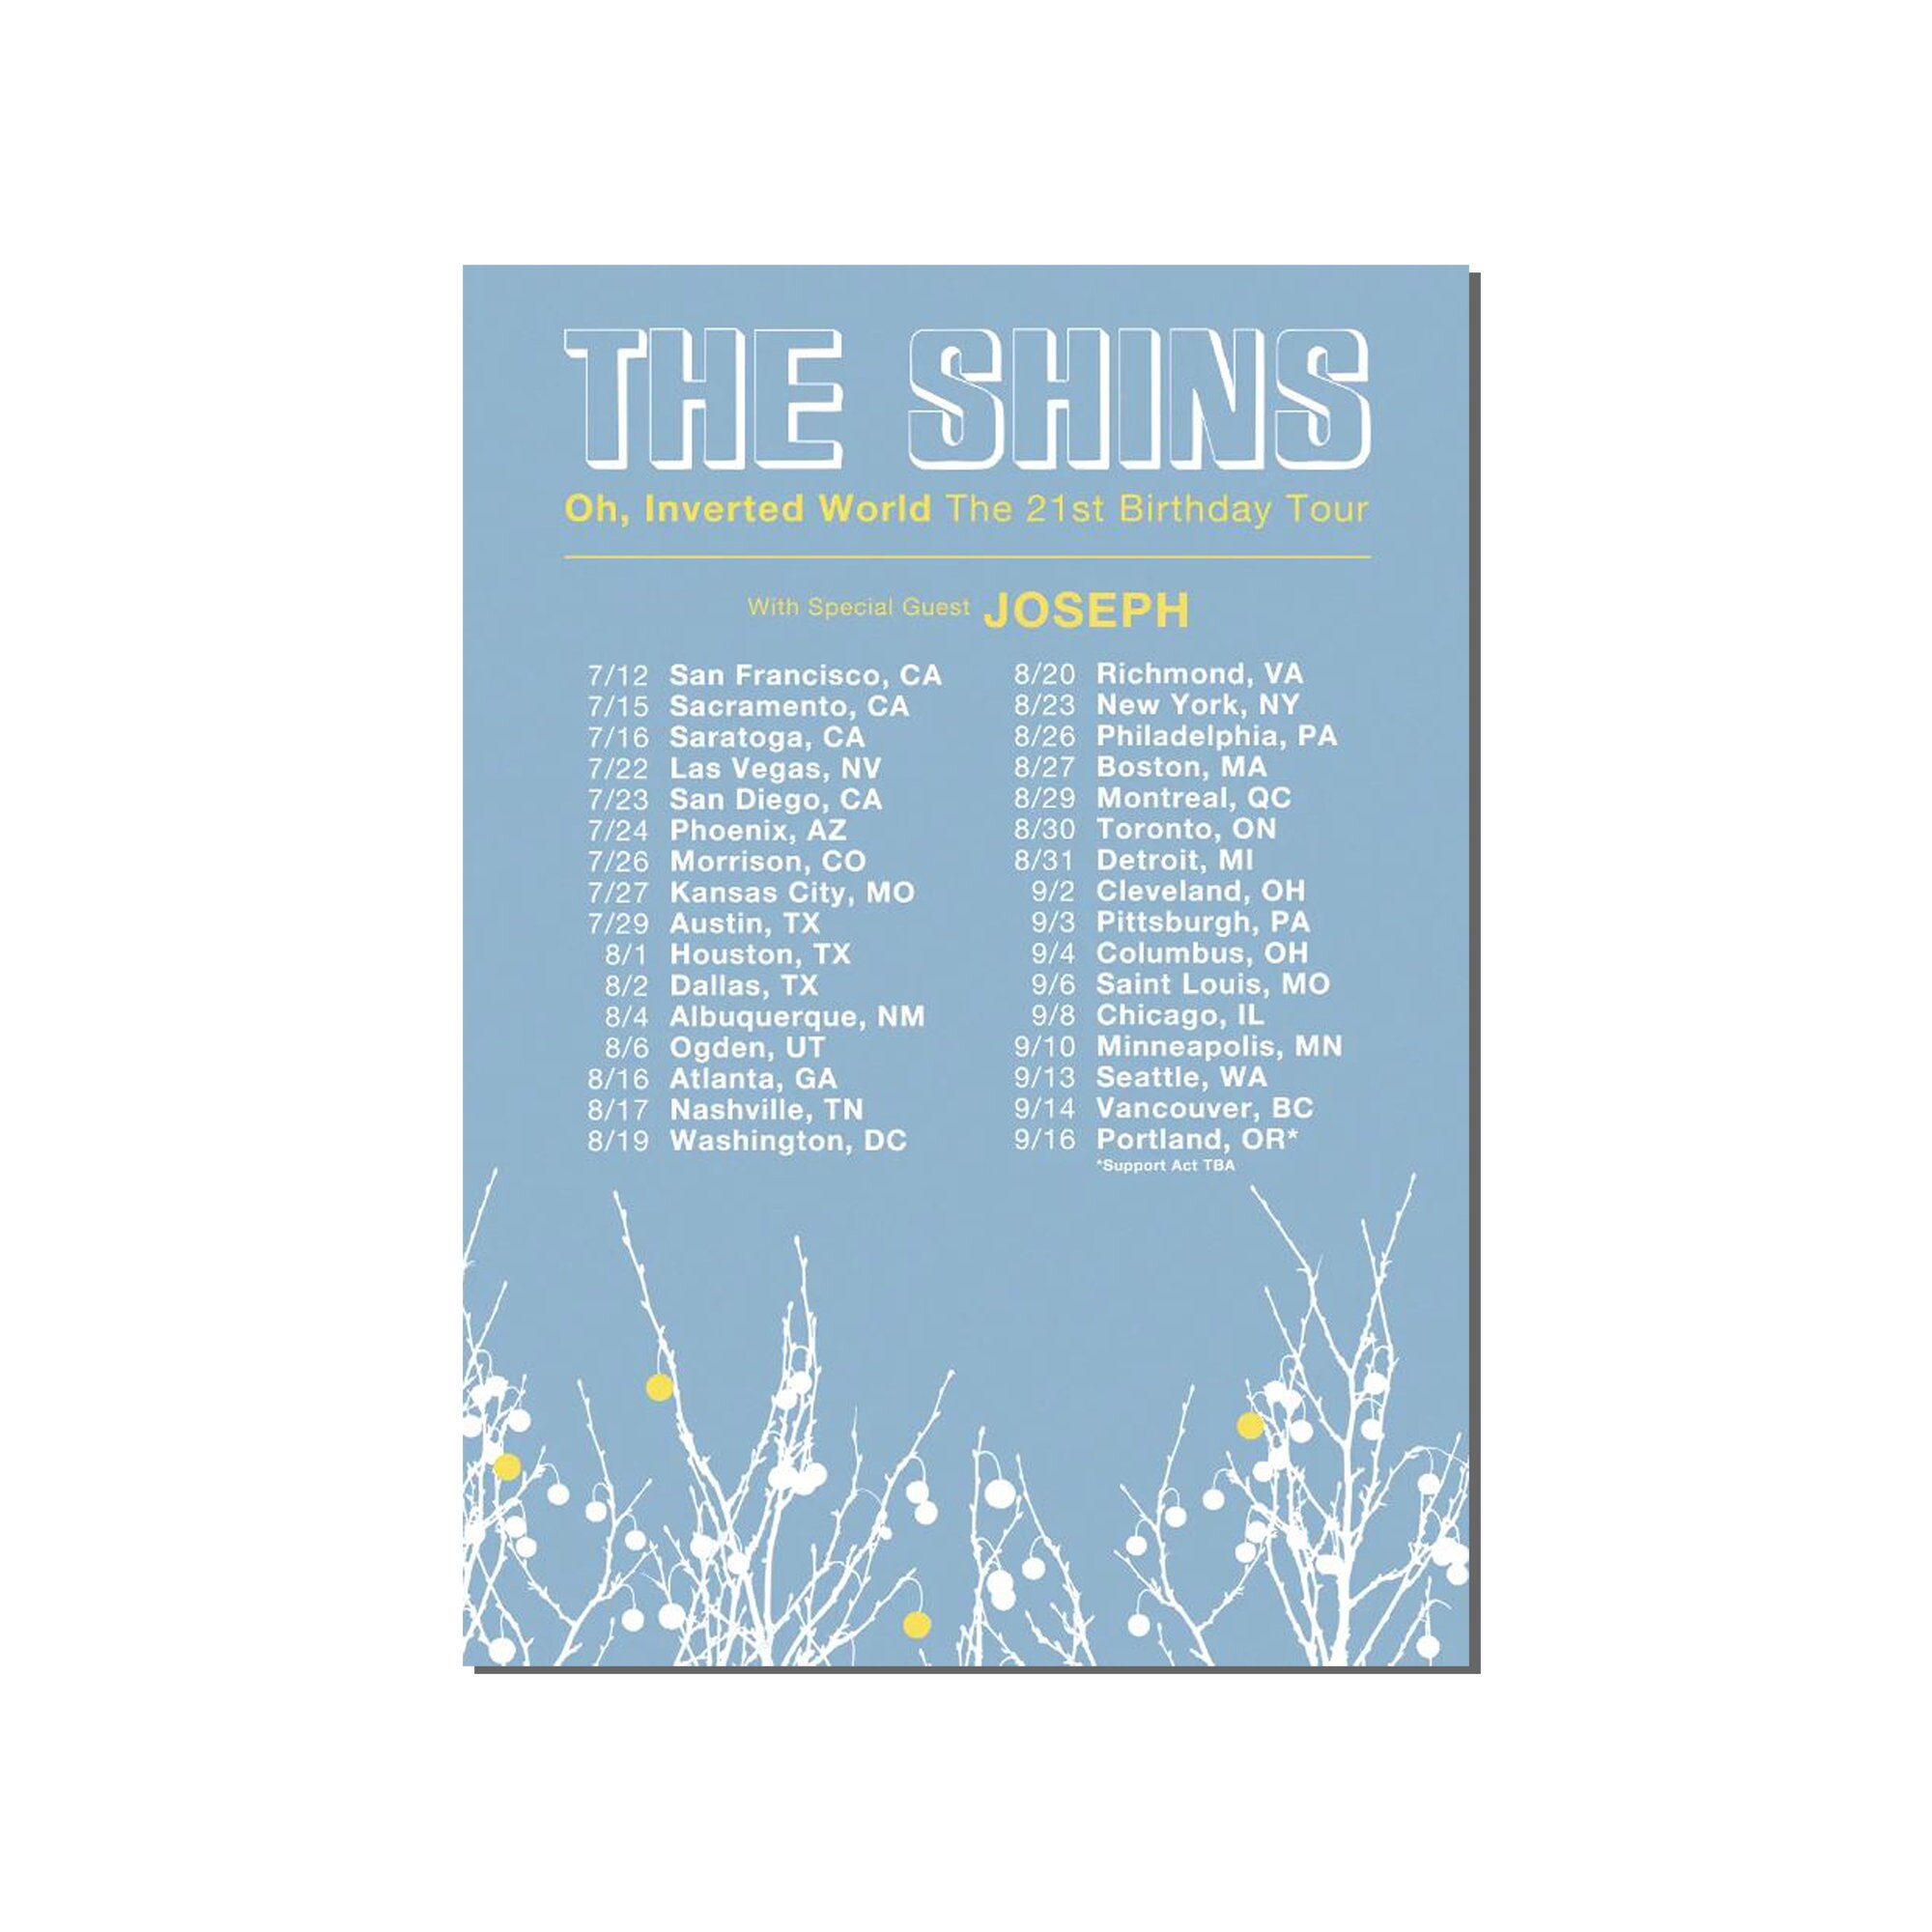 The Shins Oh Inverted World 21st Birthday Tour Poster Unframed,The Shins Tour 2022 Poster